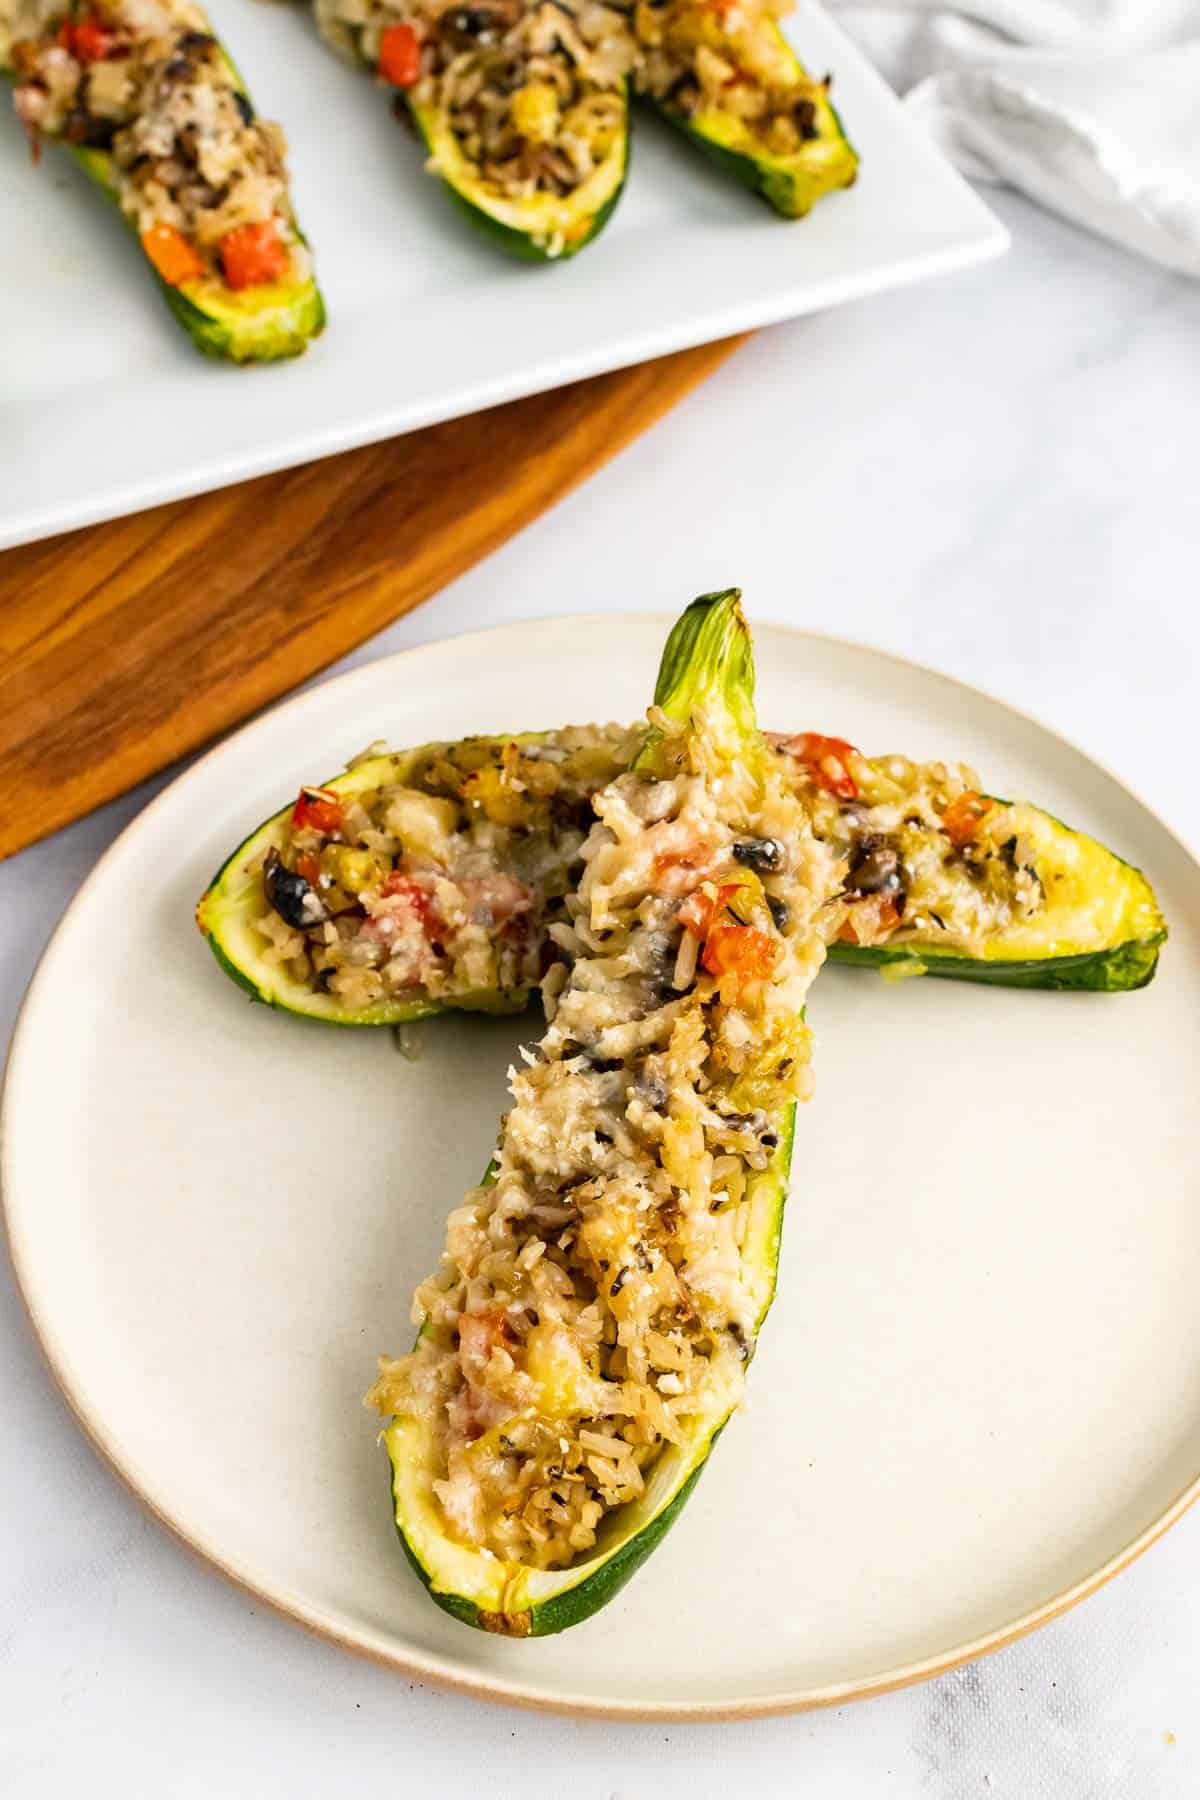 Two vegetarian stuffed zucchini halves on a white plate with a platter in the background